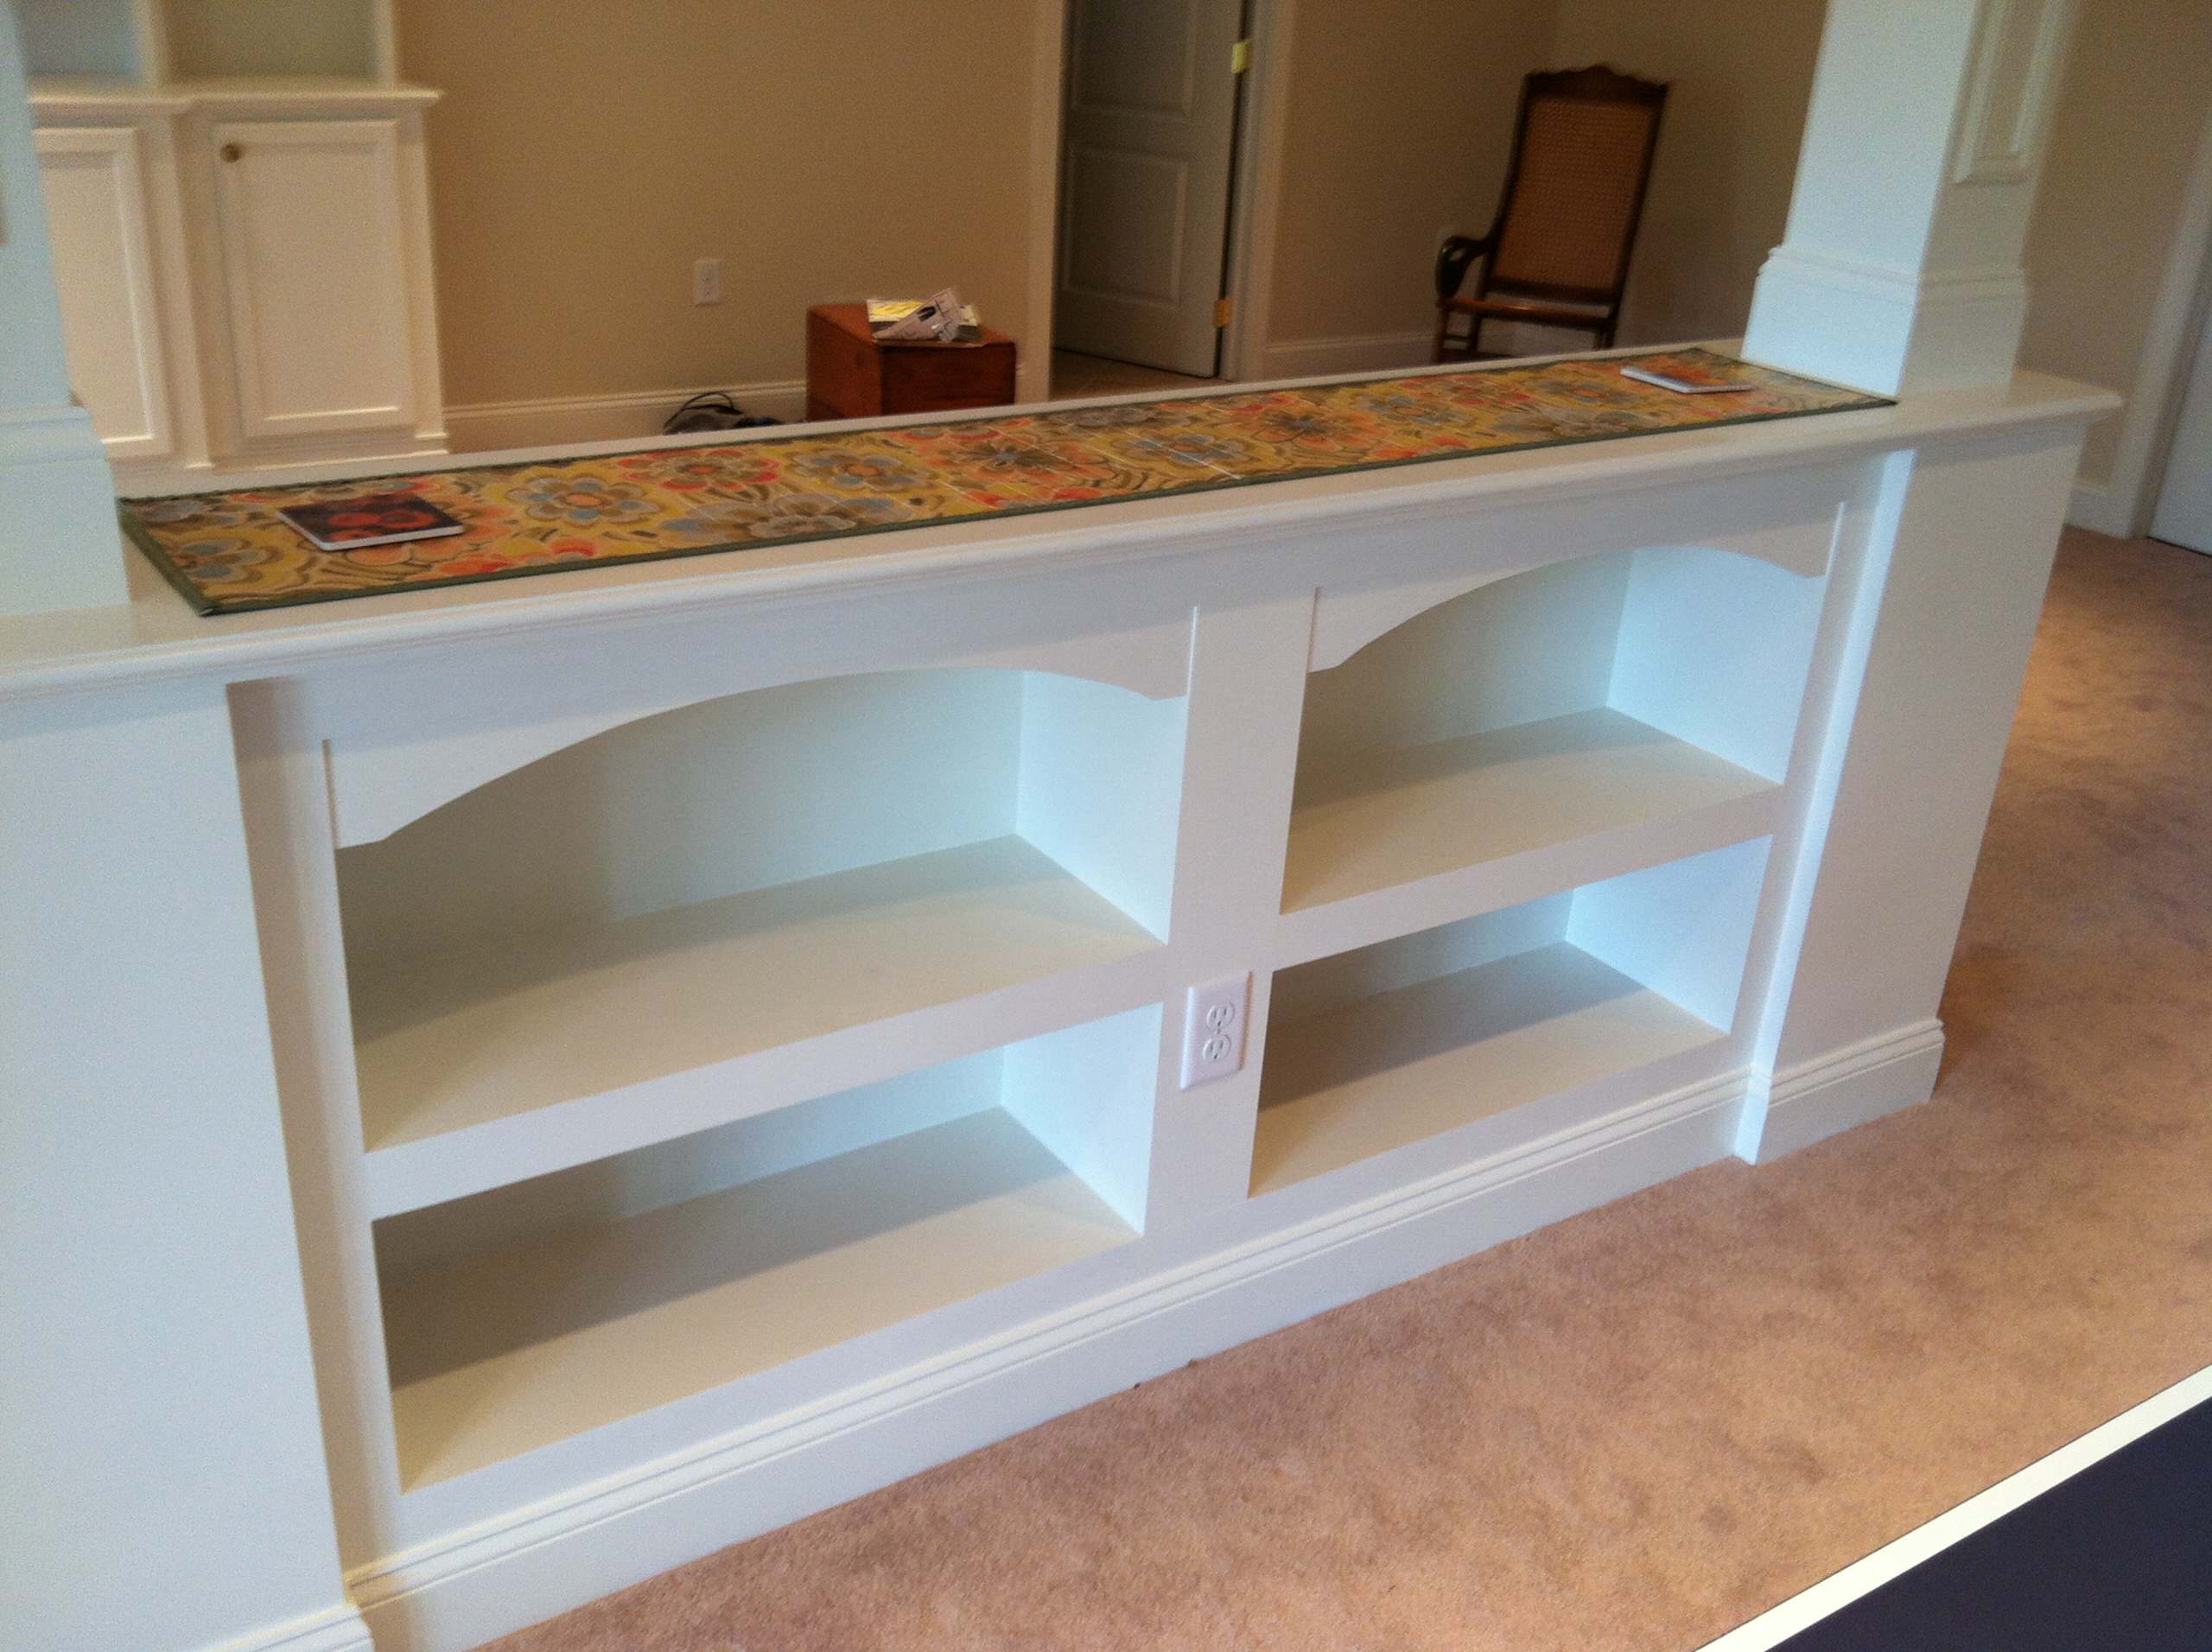 Half Wall Storage Houzz, Pony Wall With Built In Shelves